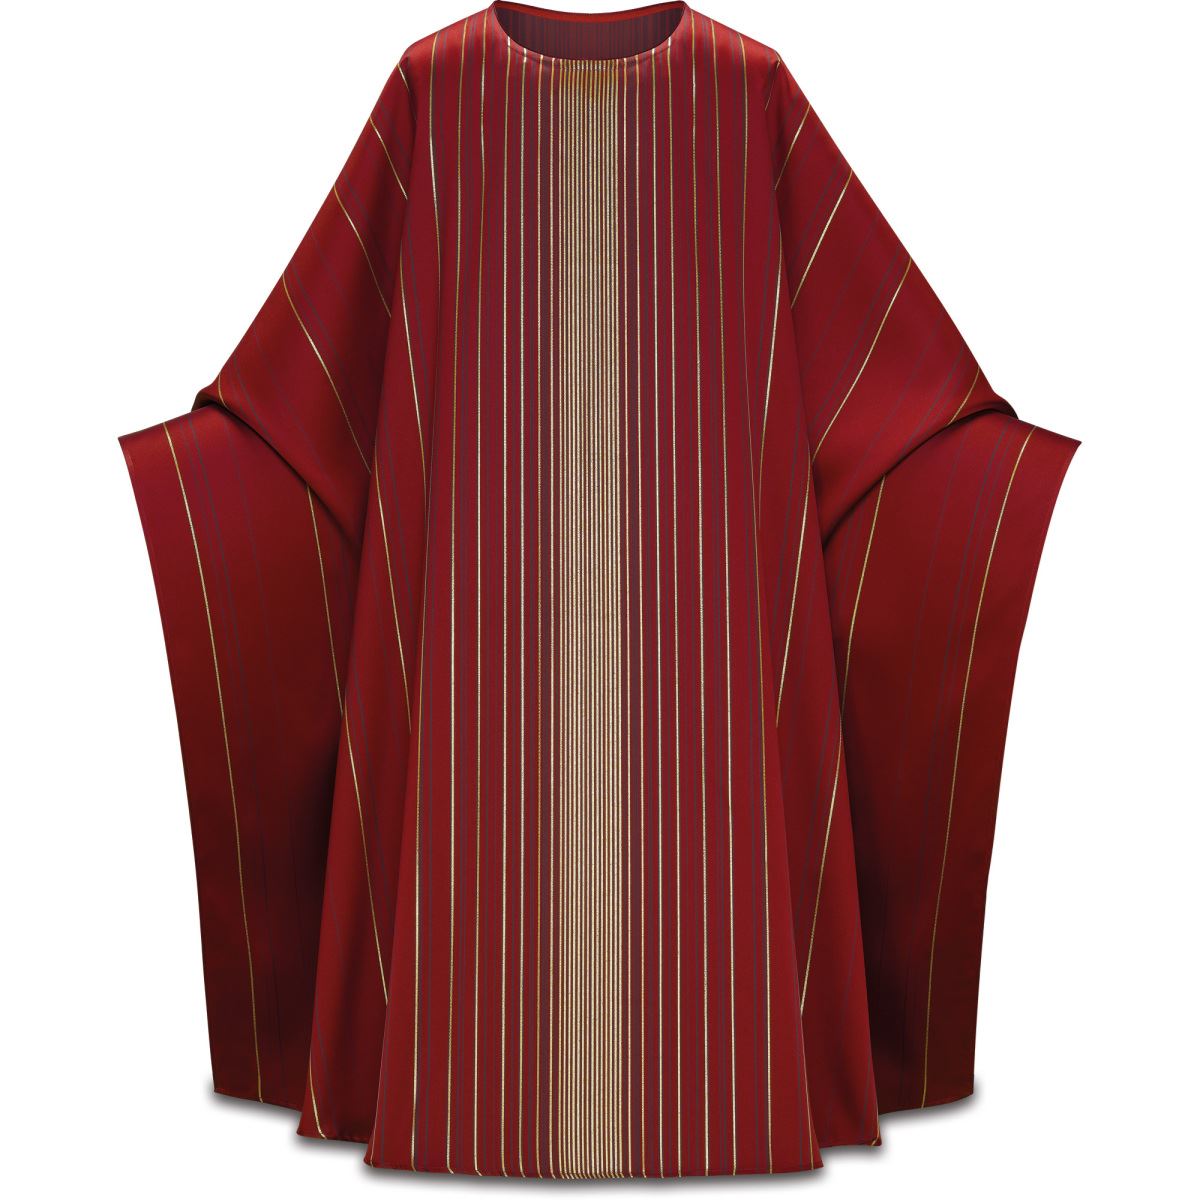 Monastic Chasuble in Red Linus Fabric with Plain Collar